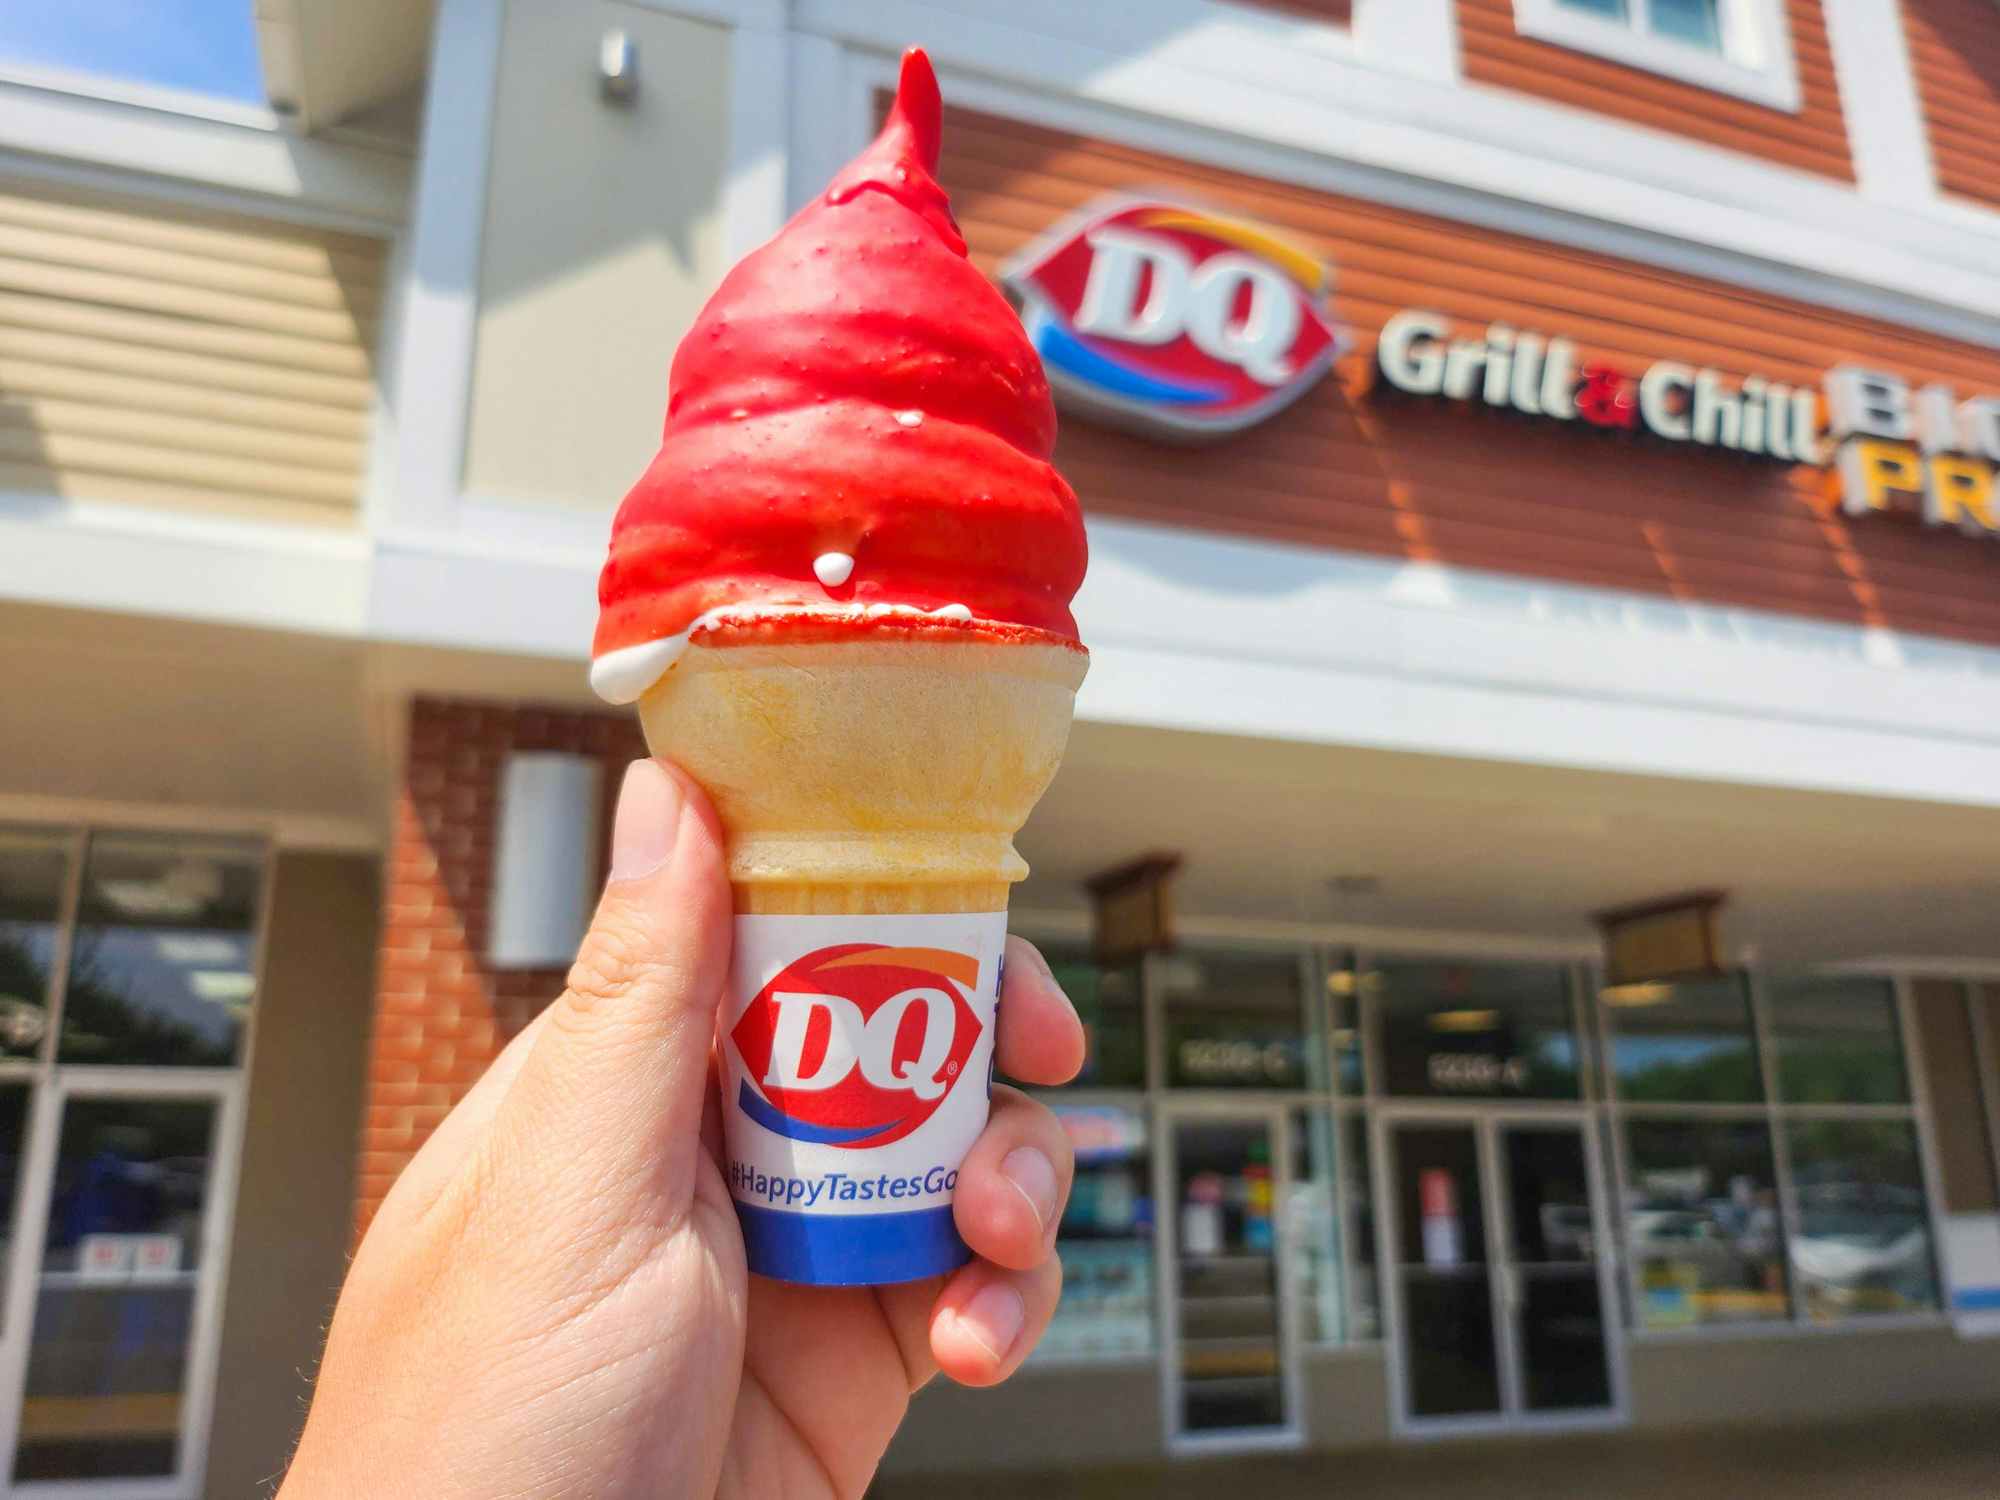 https://prod-cdn-thekrazycouponlady.imgix.net/wp-content/uploads/2023/05/dairy-queen-cherry-dipped-ice-cream-cone-kcl-1-1685132161-1685132162.jpg?auto=format&fit=fill&q=25